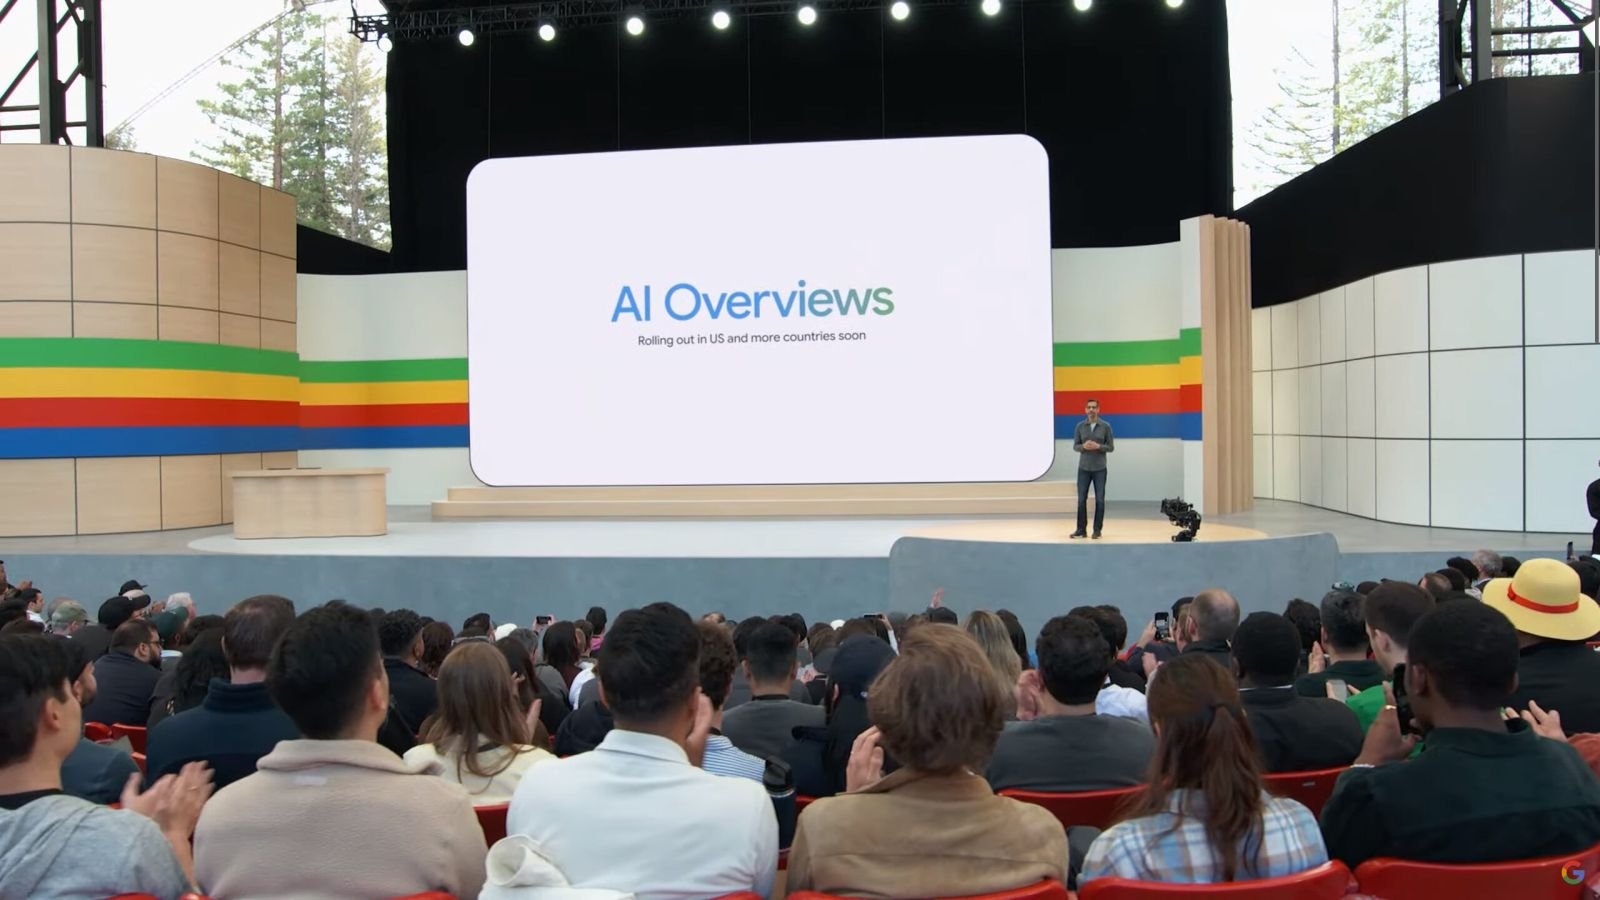 Google AI Overviews: More Searches, Less Satisfaction